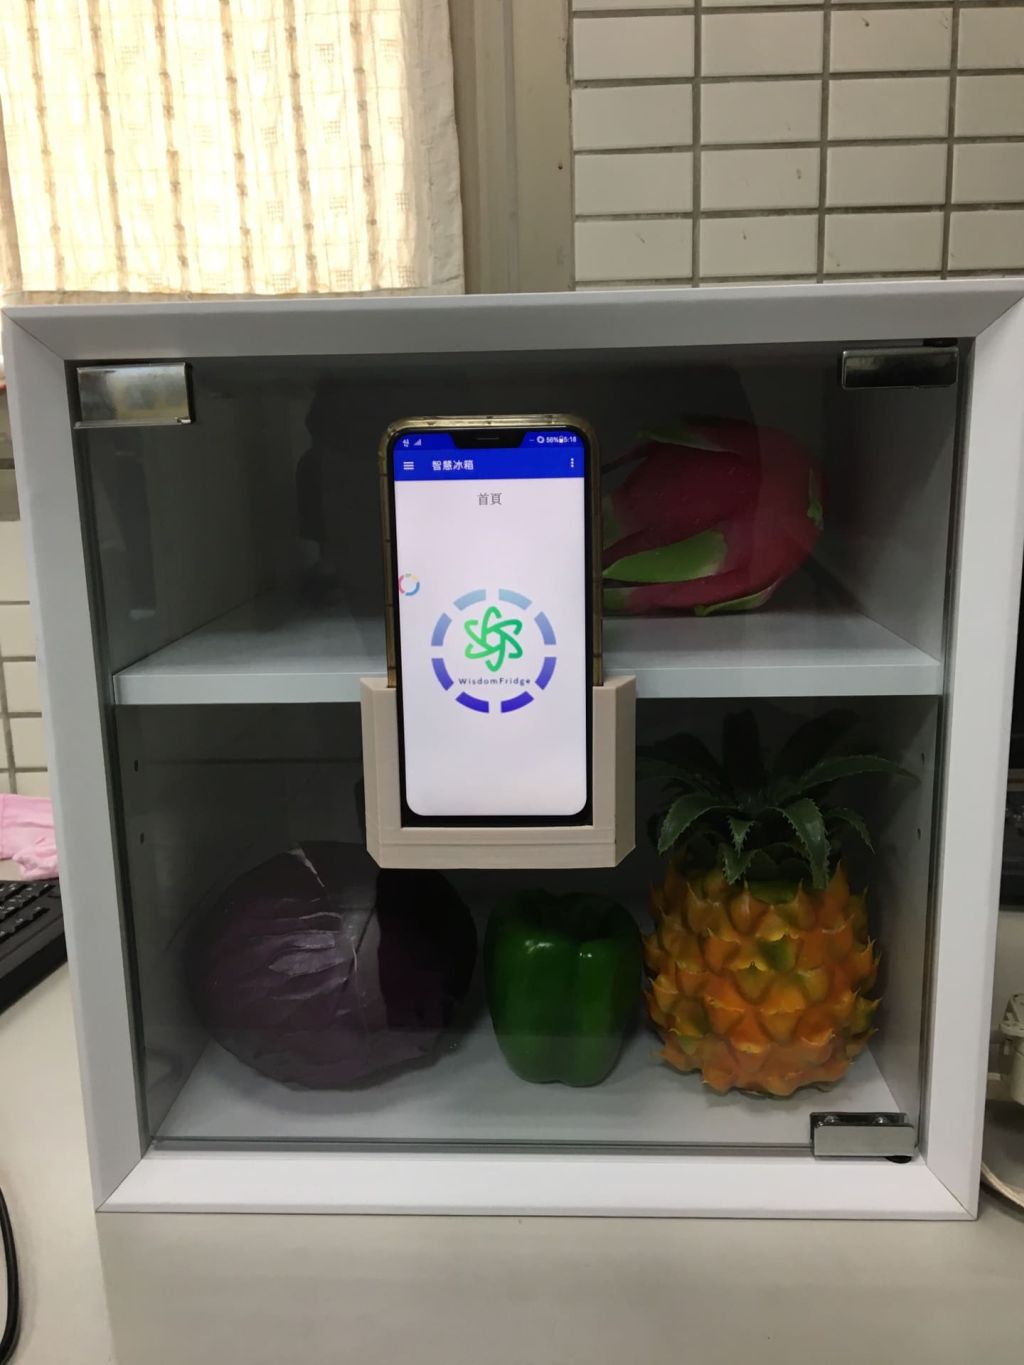 An Intelligent Refrigerator by Image Recognition, Recipe household-food-ingredients Ordering